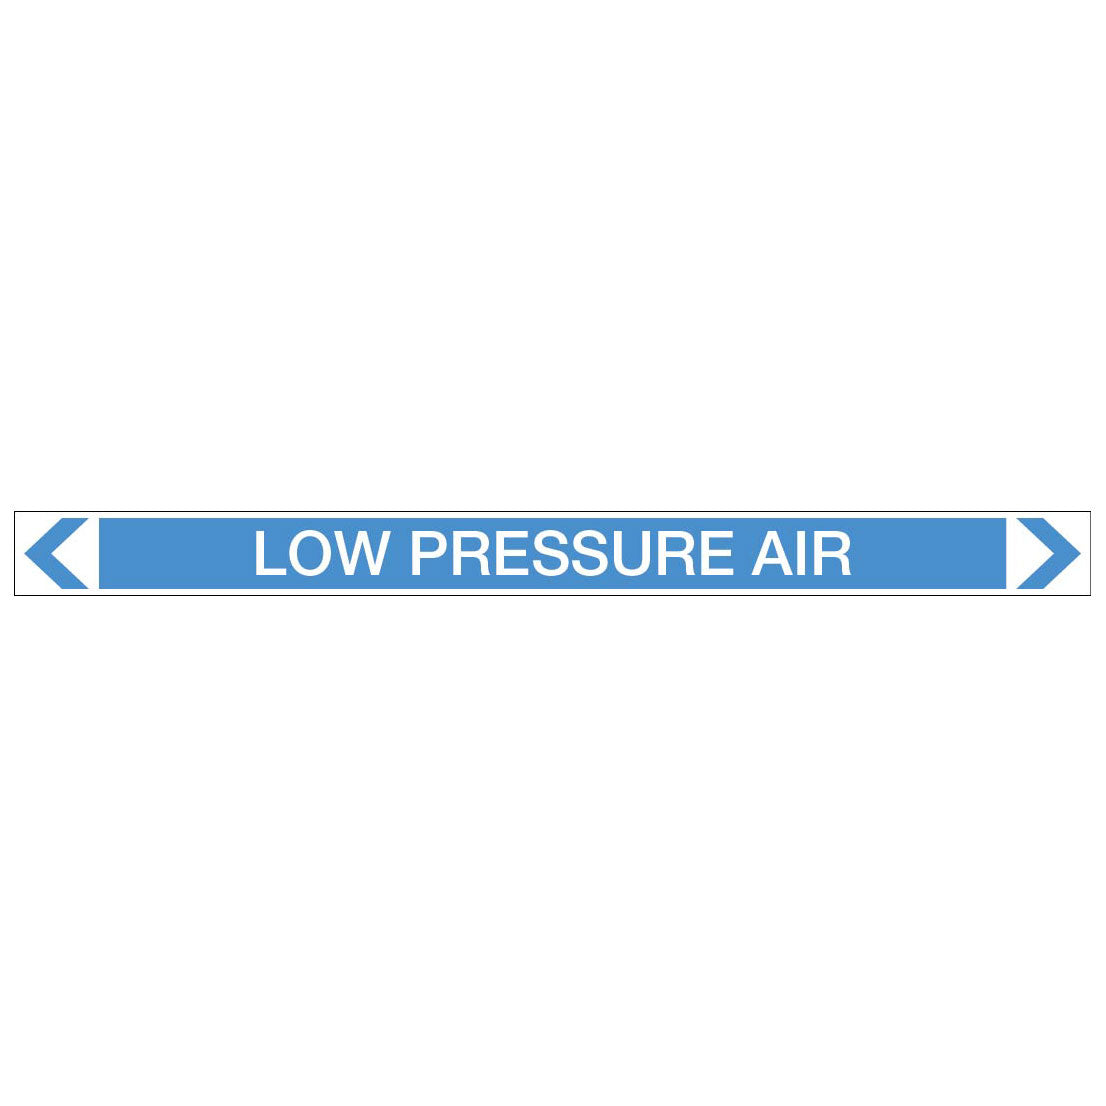 Air - Low Pressure Air - Pipe Marker Sticker